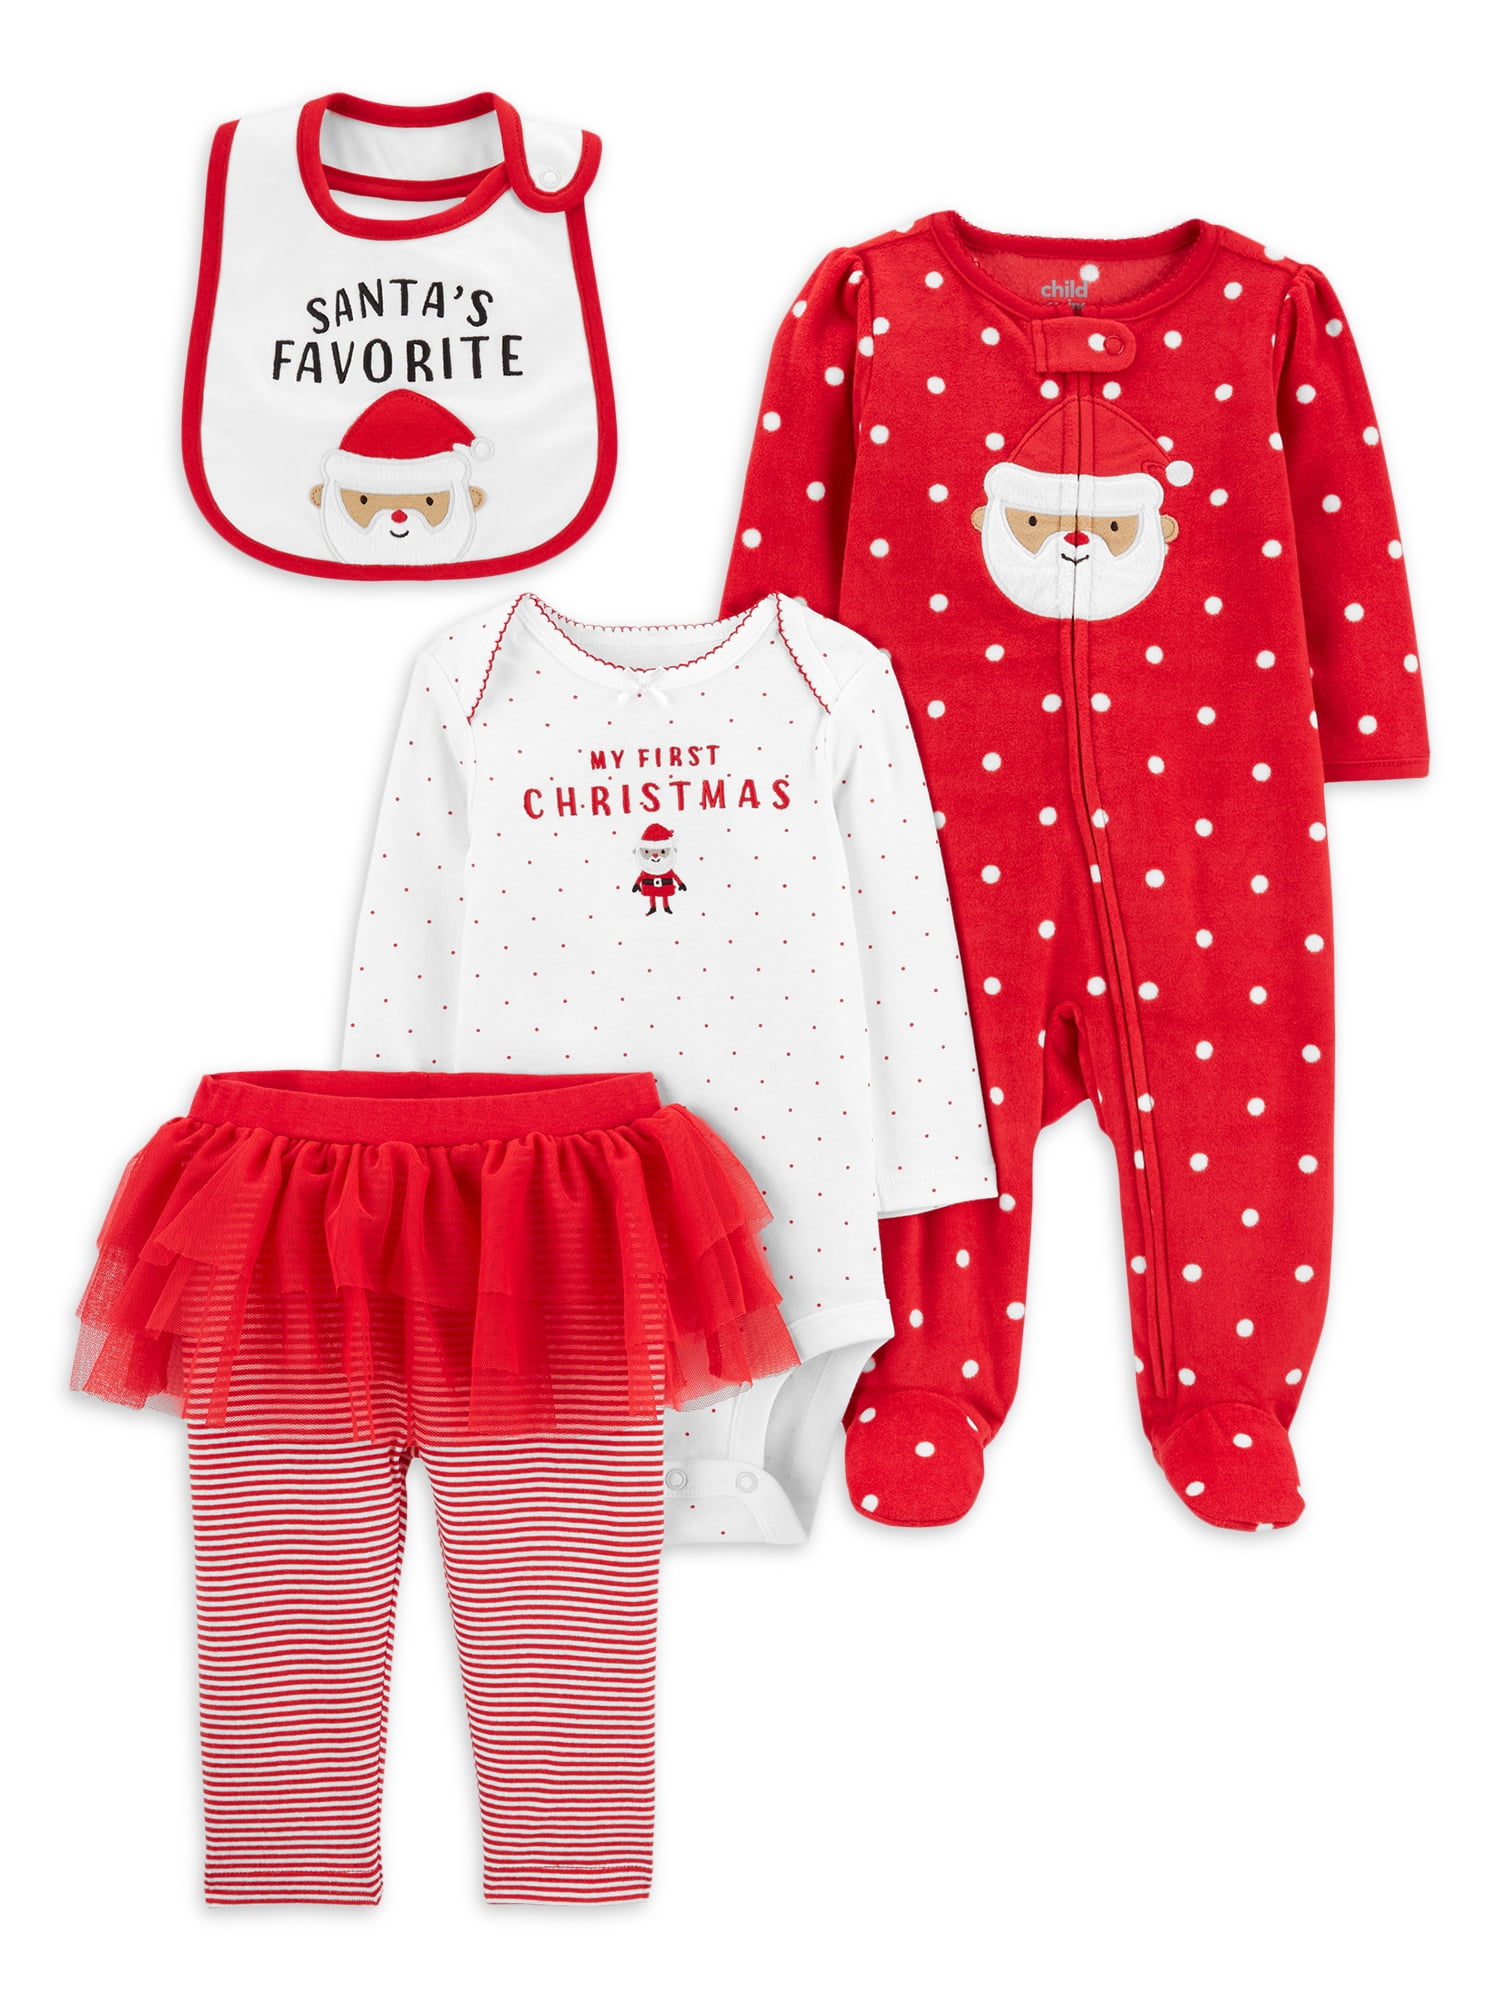 CARTERS Girls 4 pc Set Size 3 6 months Bodysuits Pants Hat Christmas Outfit 